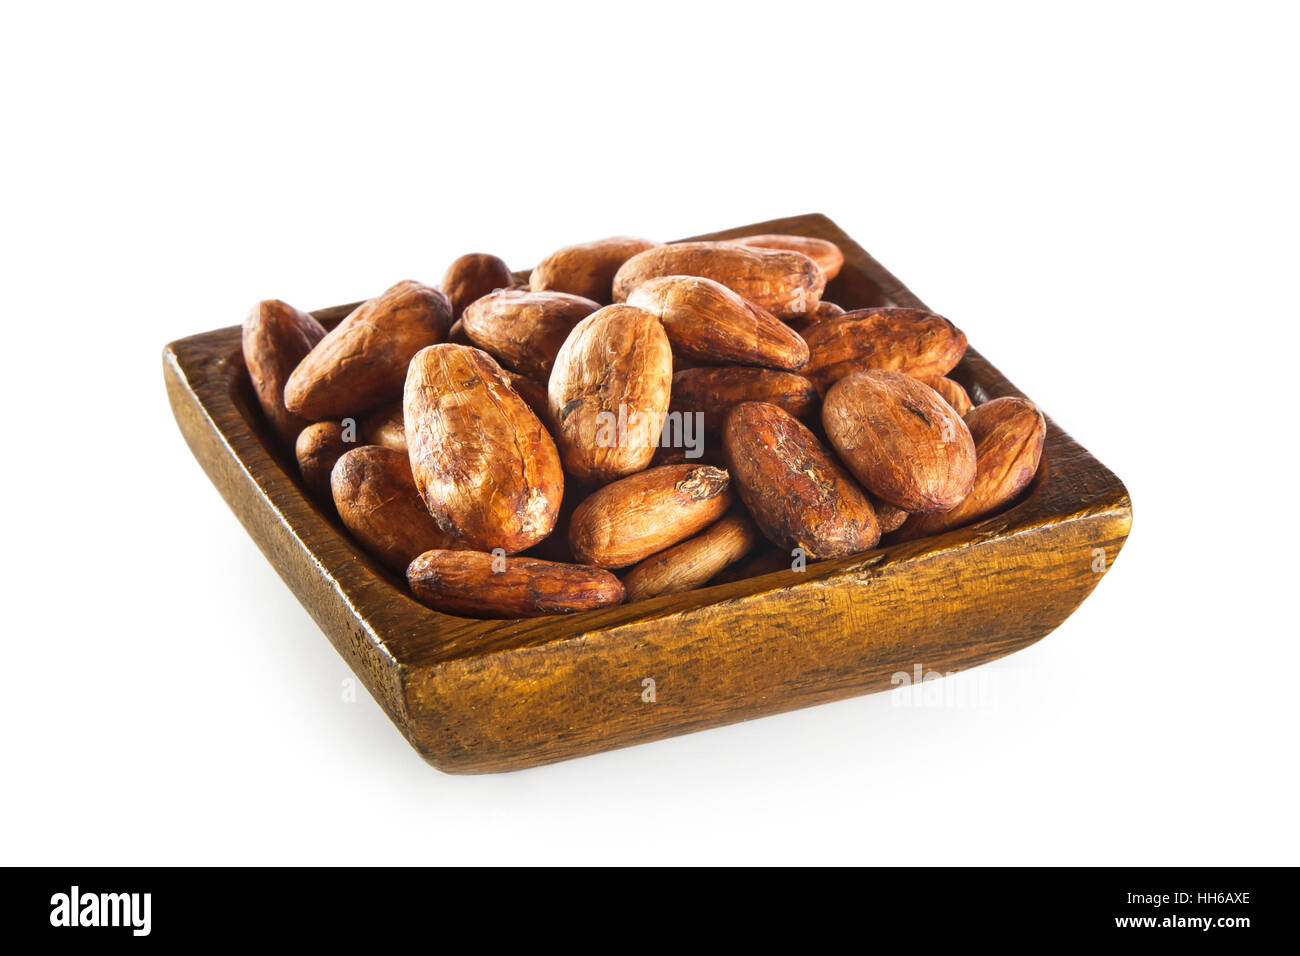 Raw cocoa beans in wooden bowl isolated on white background Stock Photo